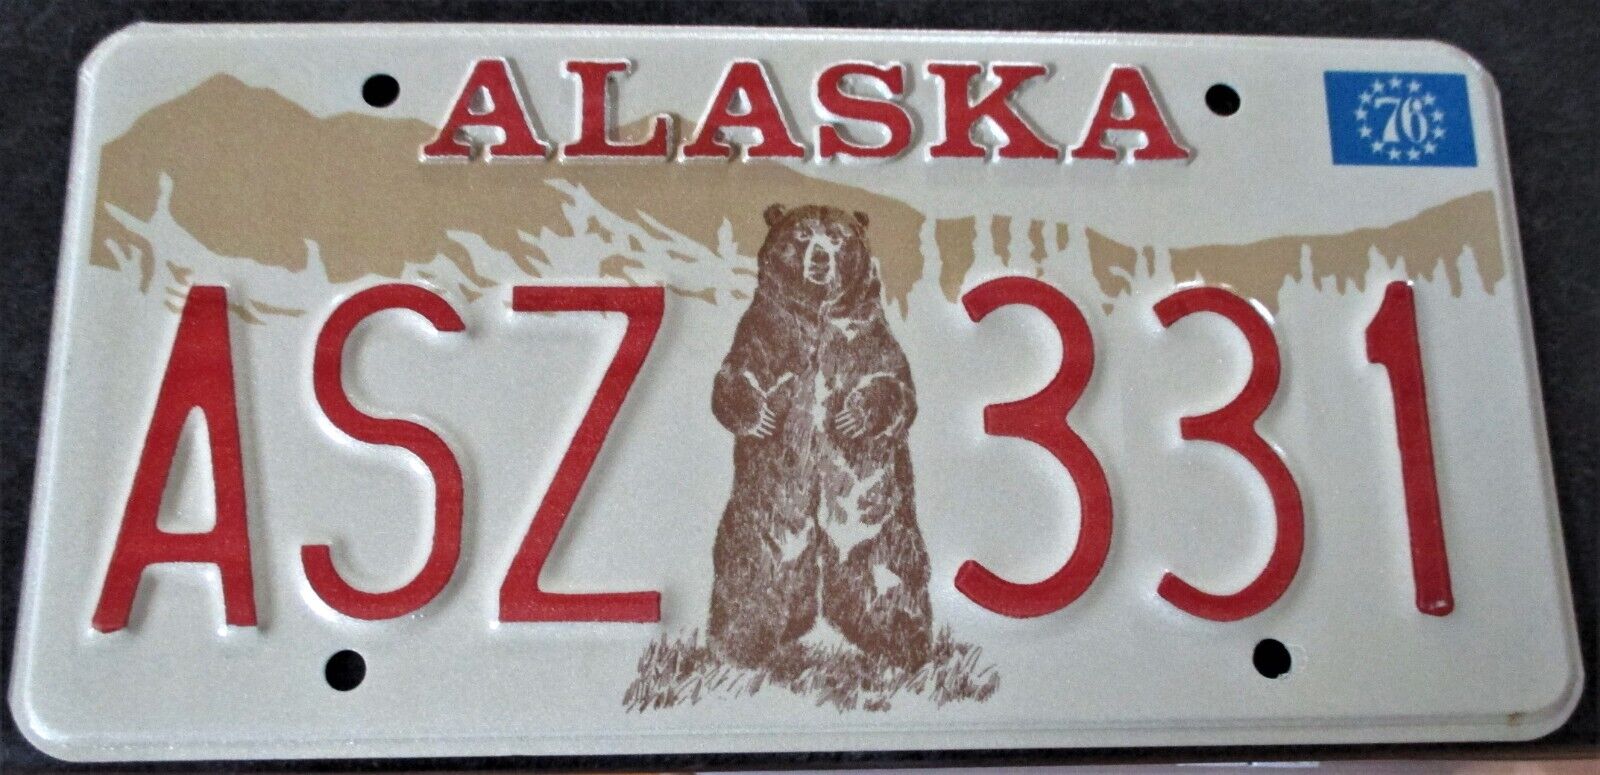 1976 Alaska Grizzly Bear License Plate  # Asz 331 **mint  Condition  Reduced